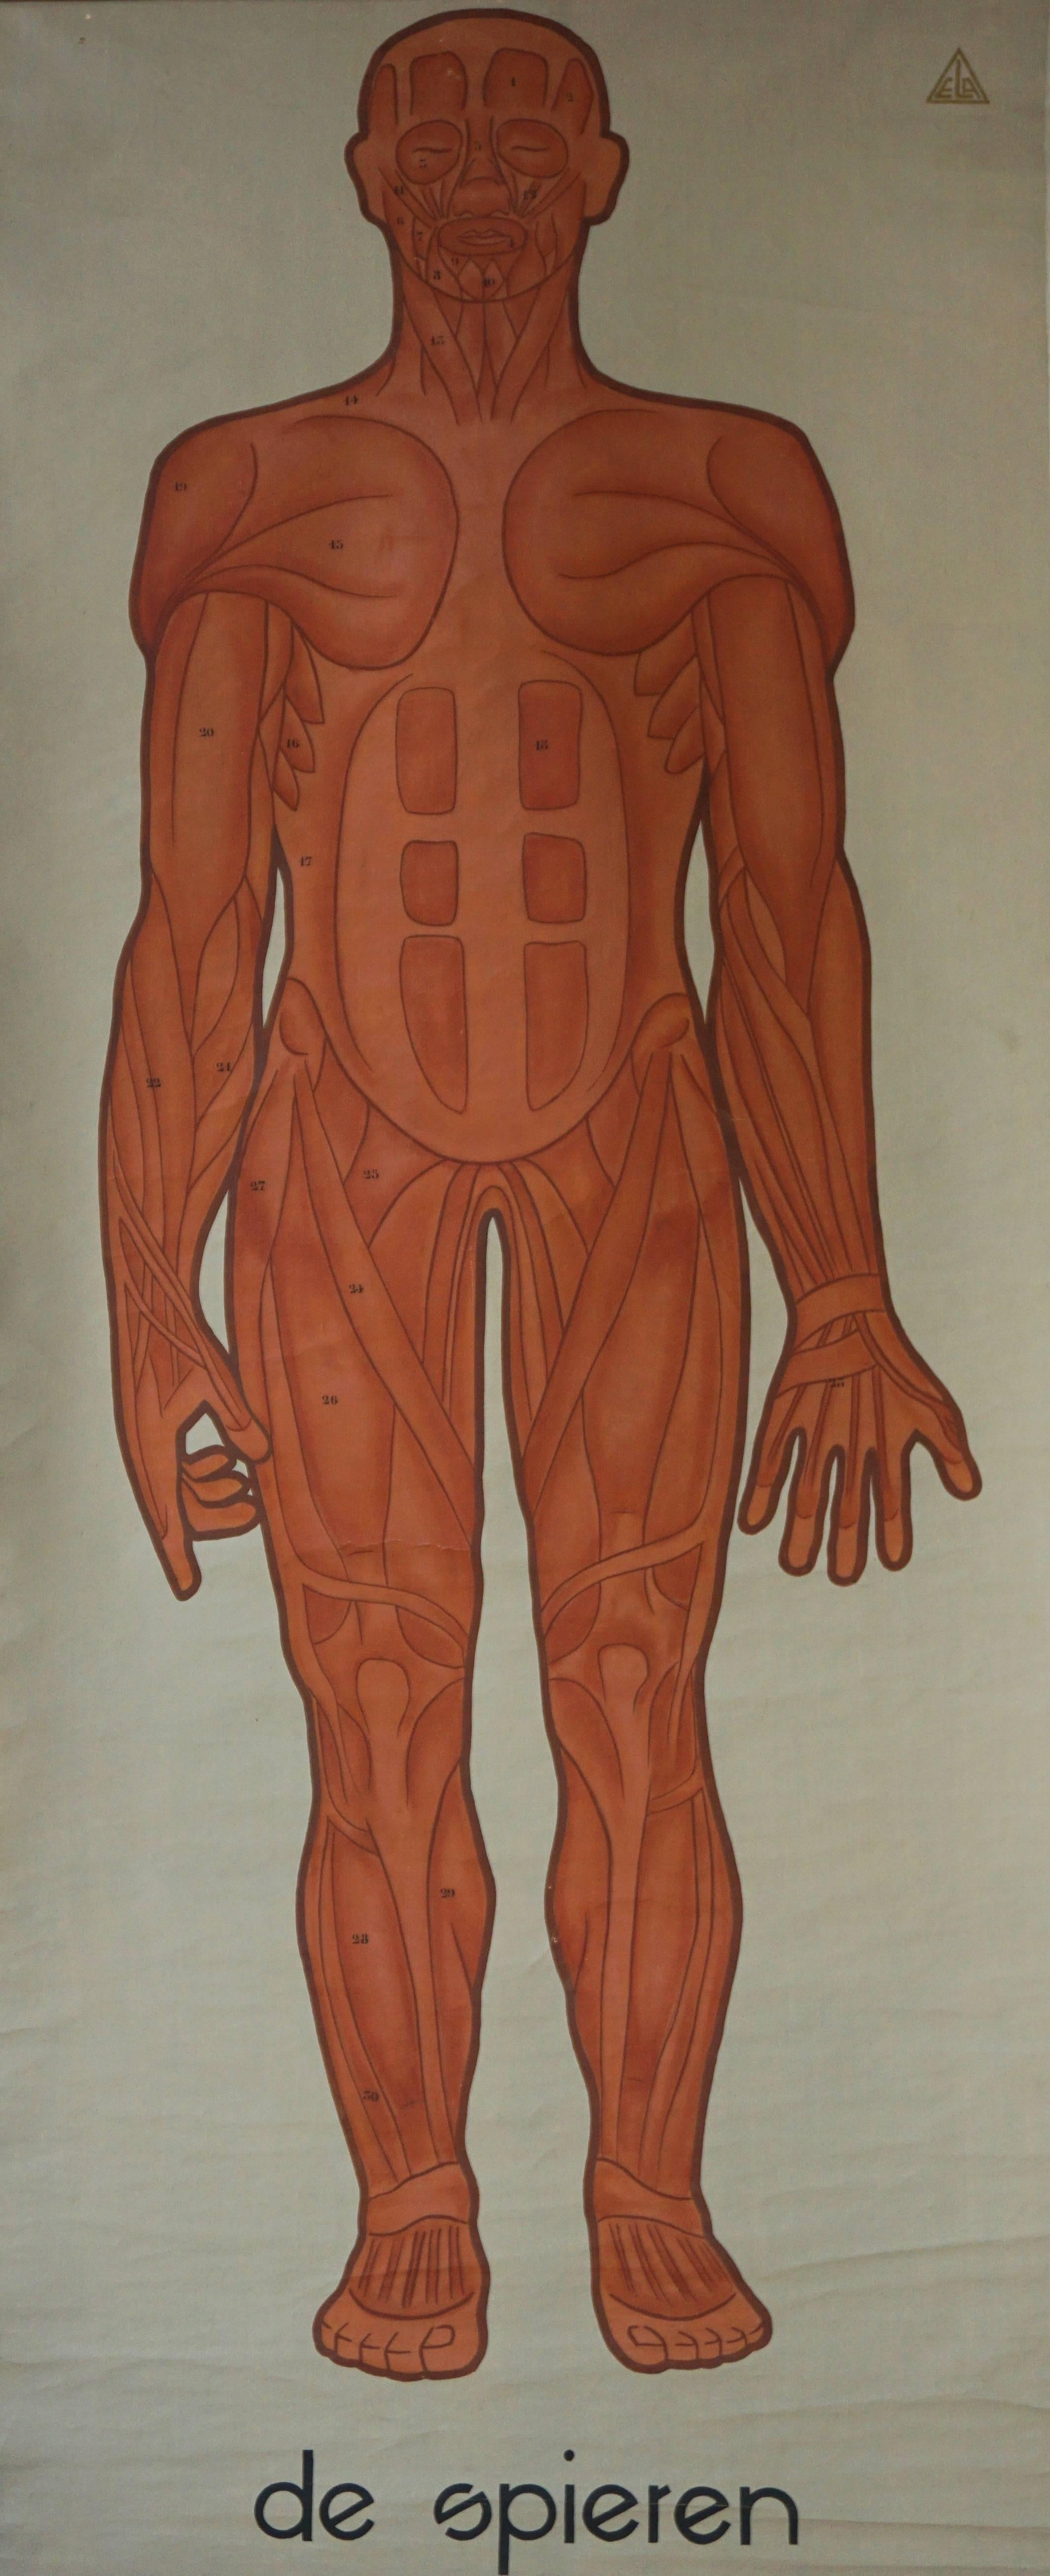 Vintage anatomical chart muscular structure of man.
Holland, circa 1930.